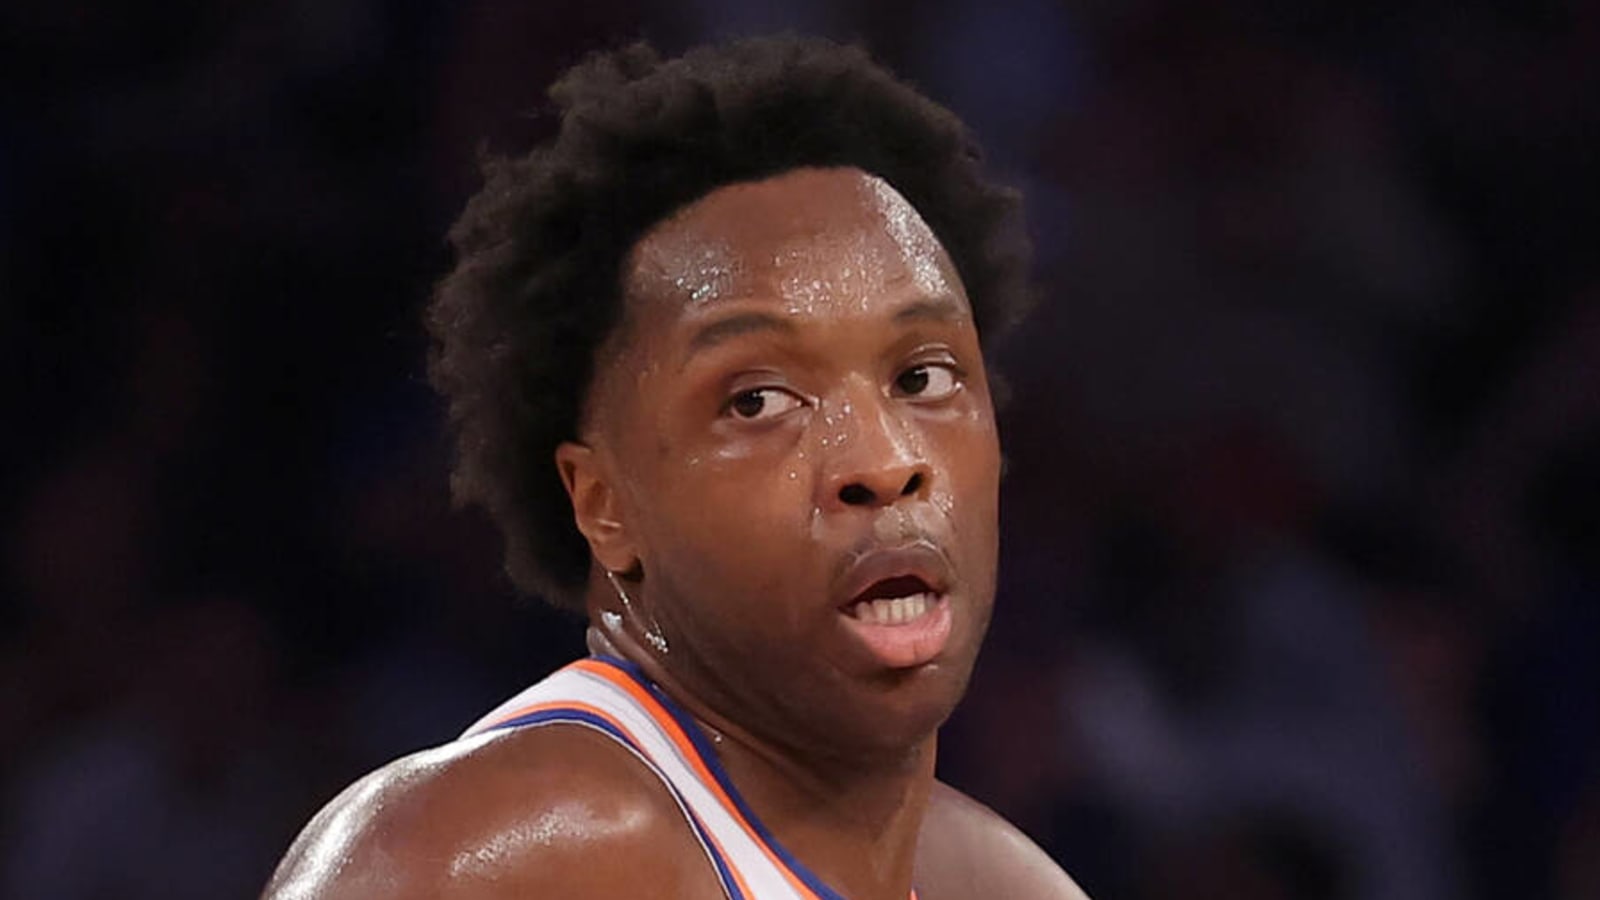 Knicks rule out OG Anunoby for Game 3 with hamstring strain, Brunson questionable